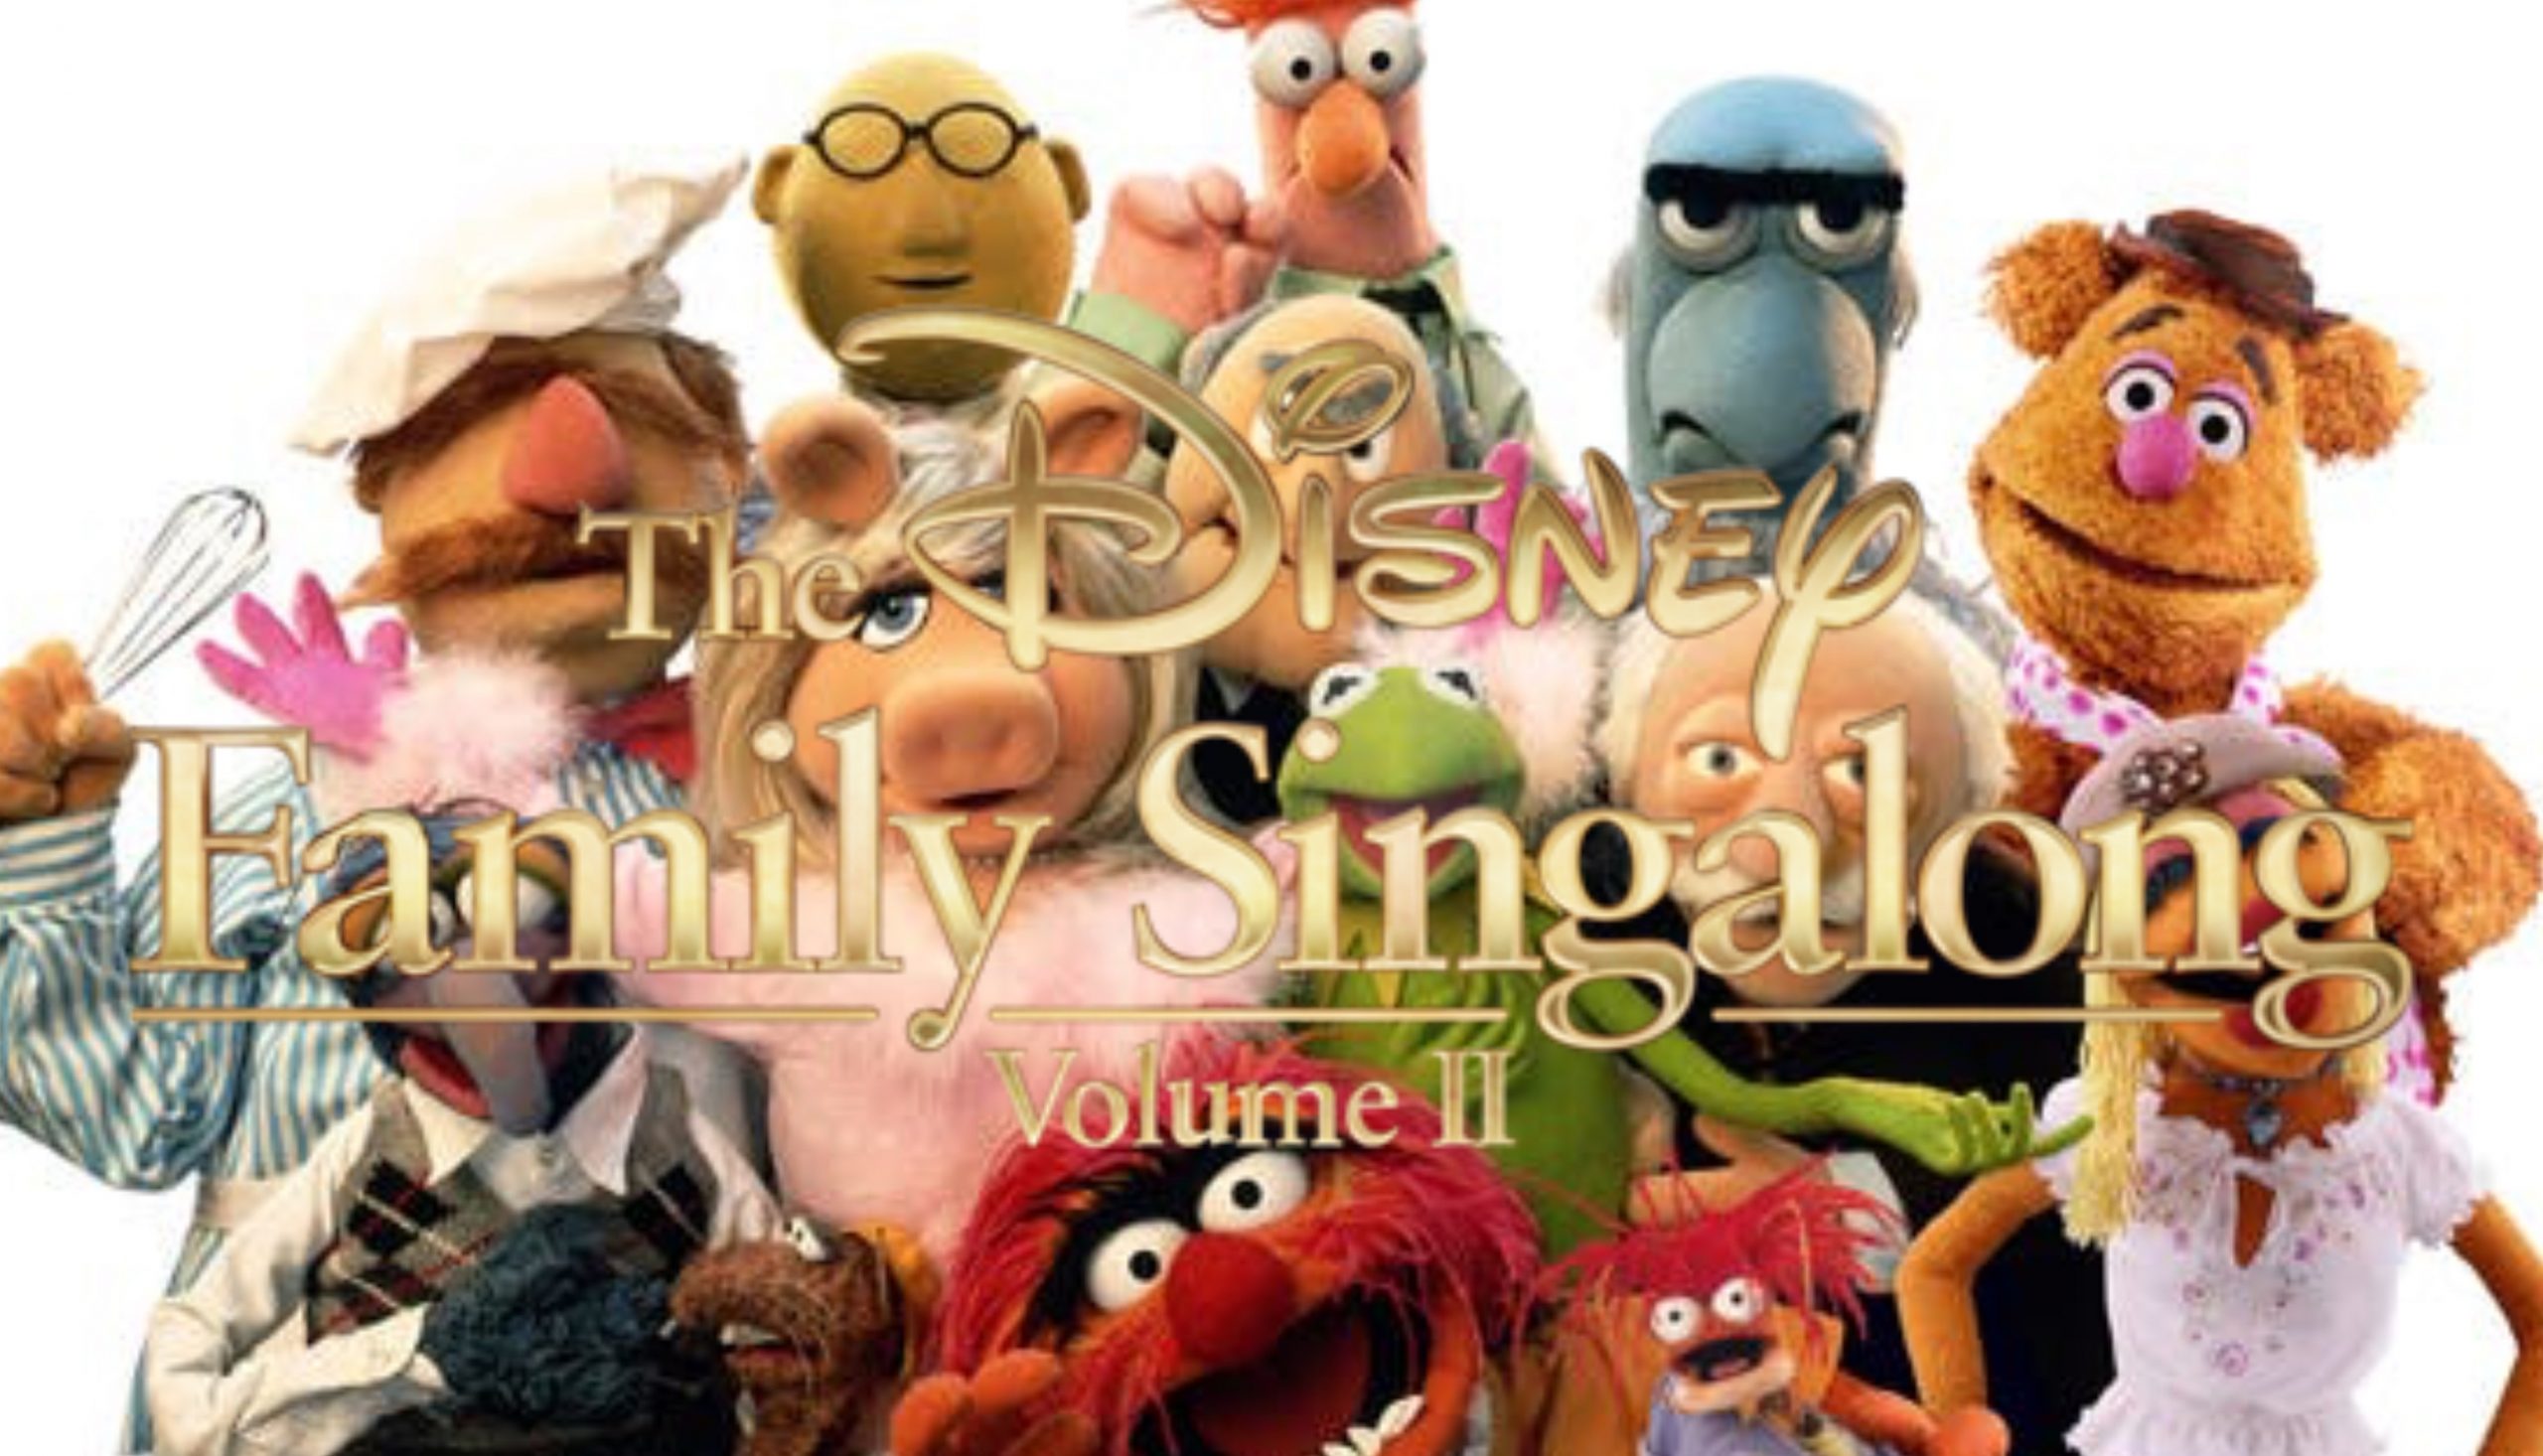 New Performers and The Muppets Appearance Announced for the ‘Disney Family Singalong: Volume II’